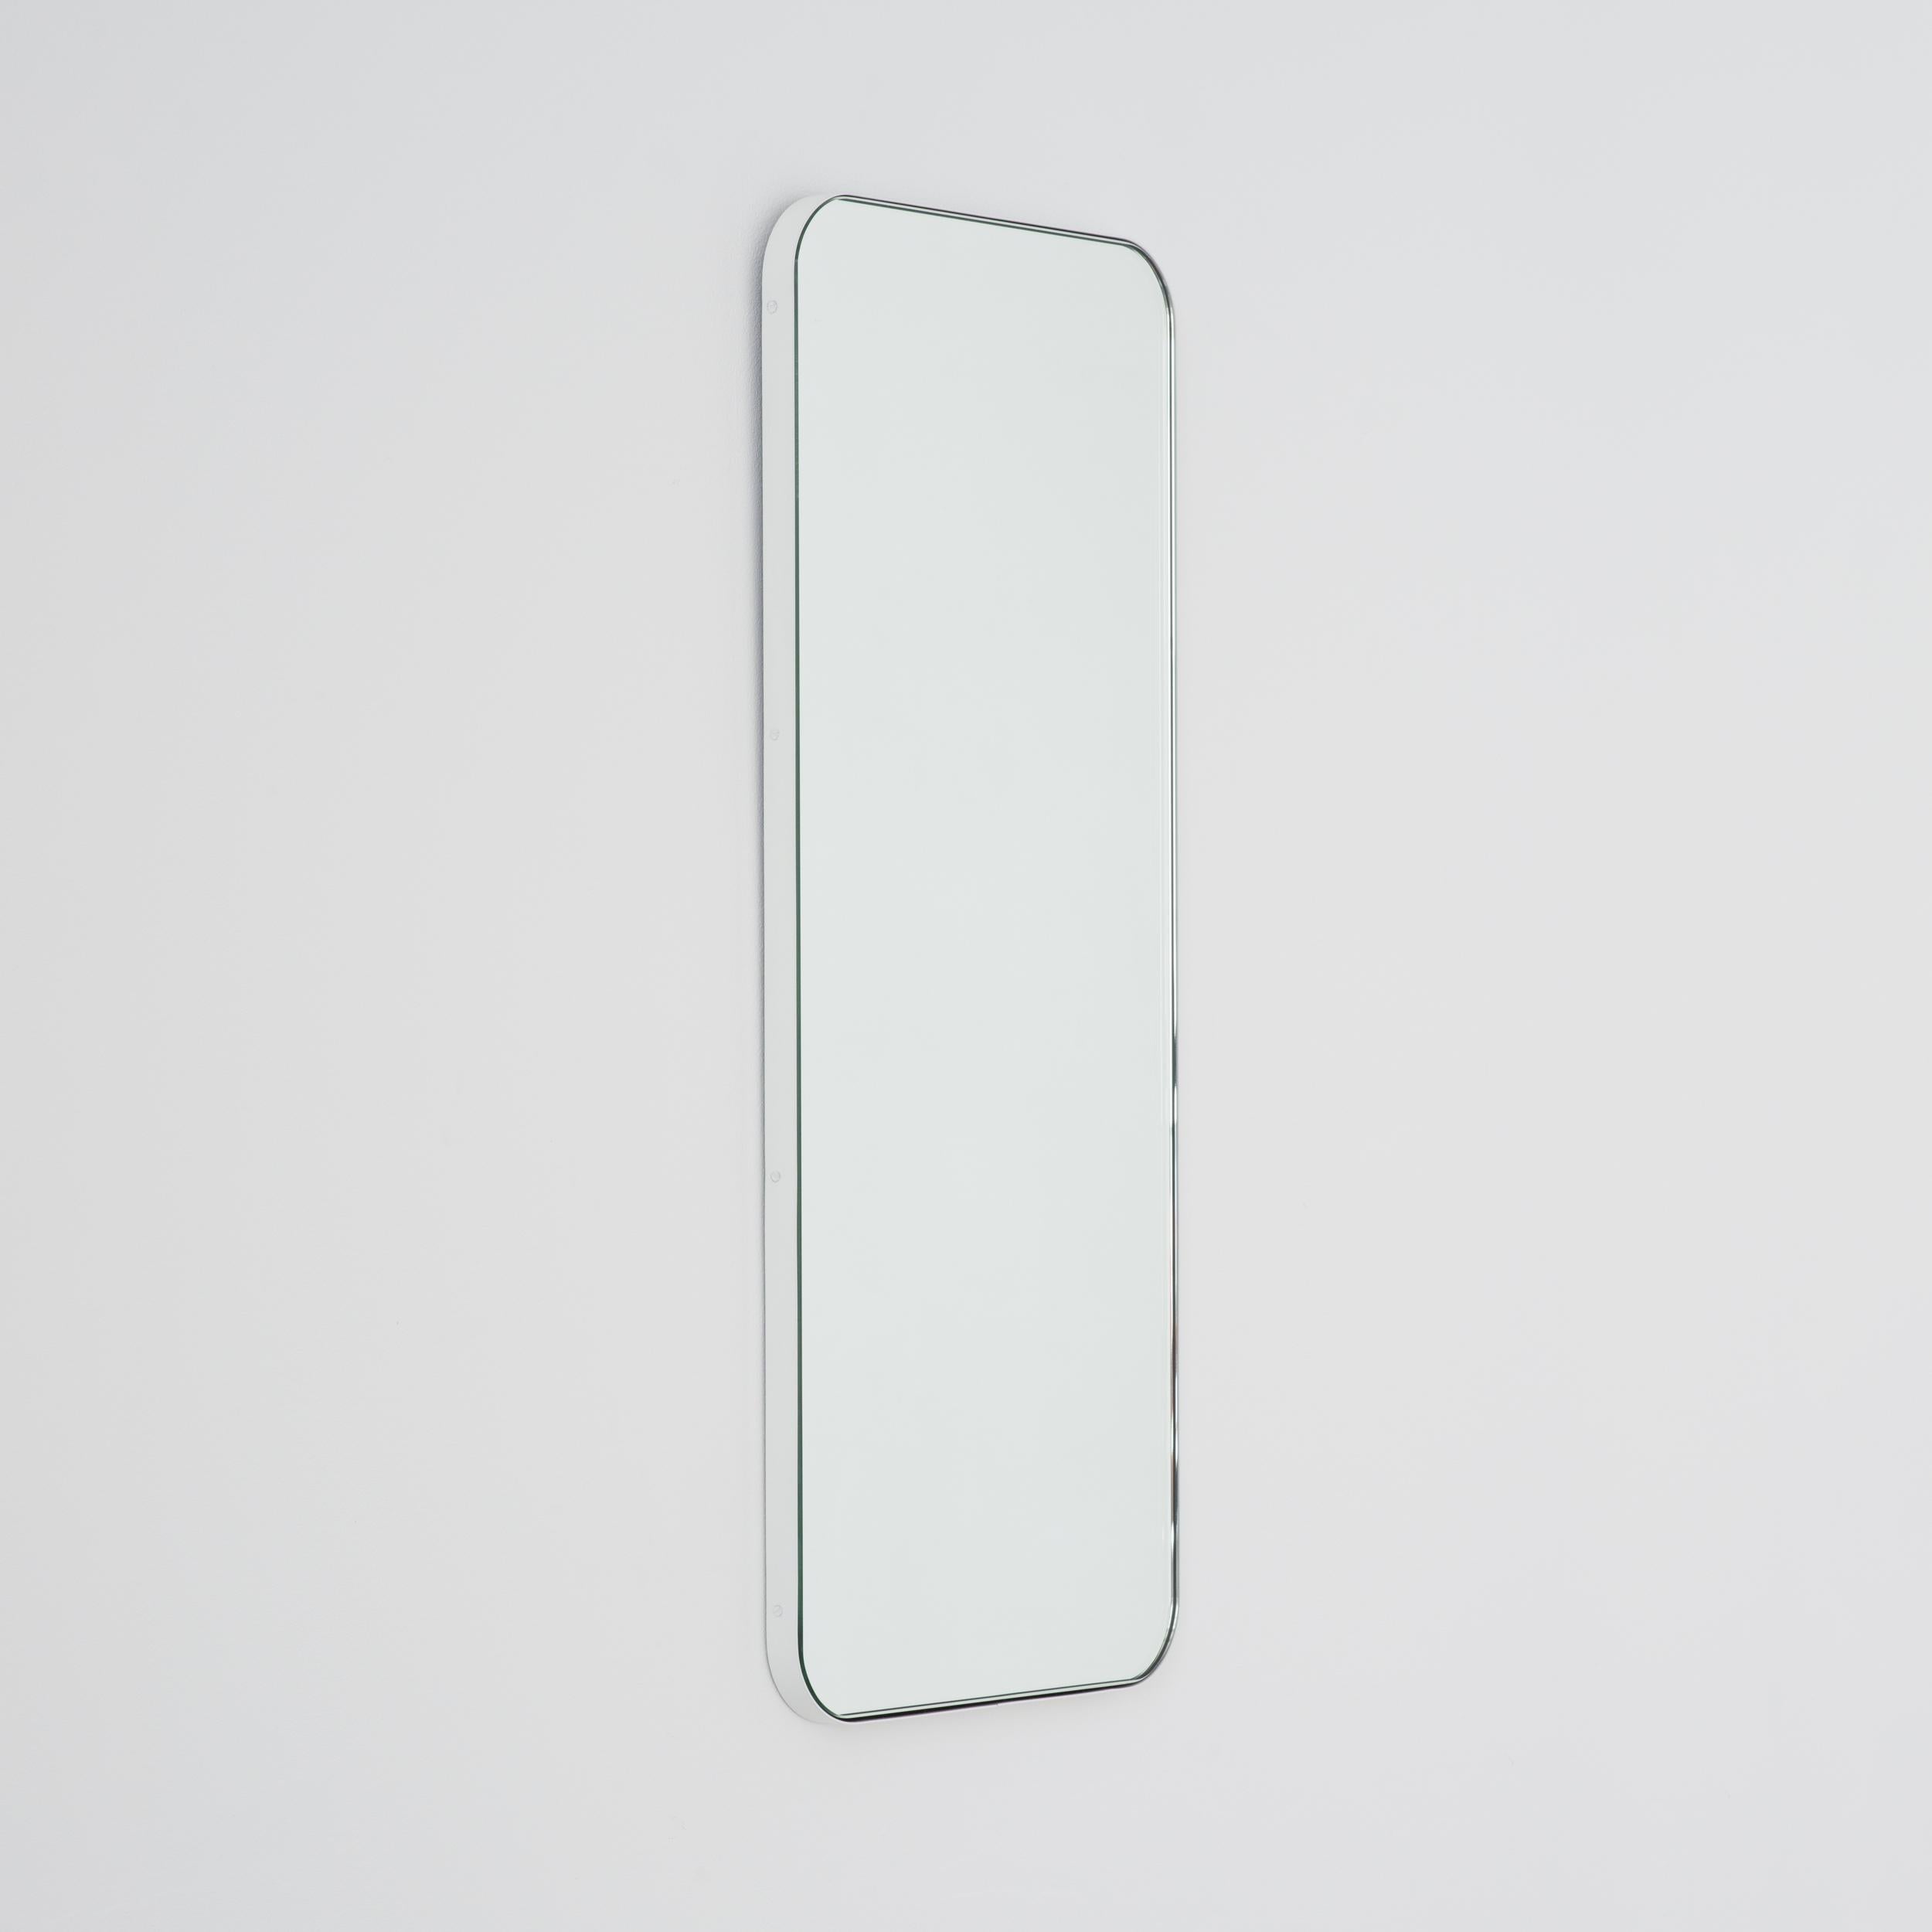 Quadris Rectangular Modern Mirror with a White Frame, XL In New Condition For Sale In London, GB